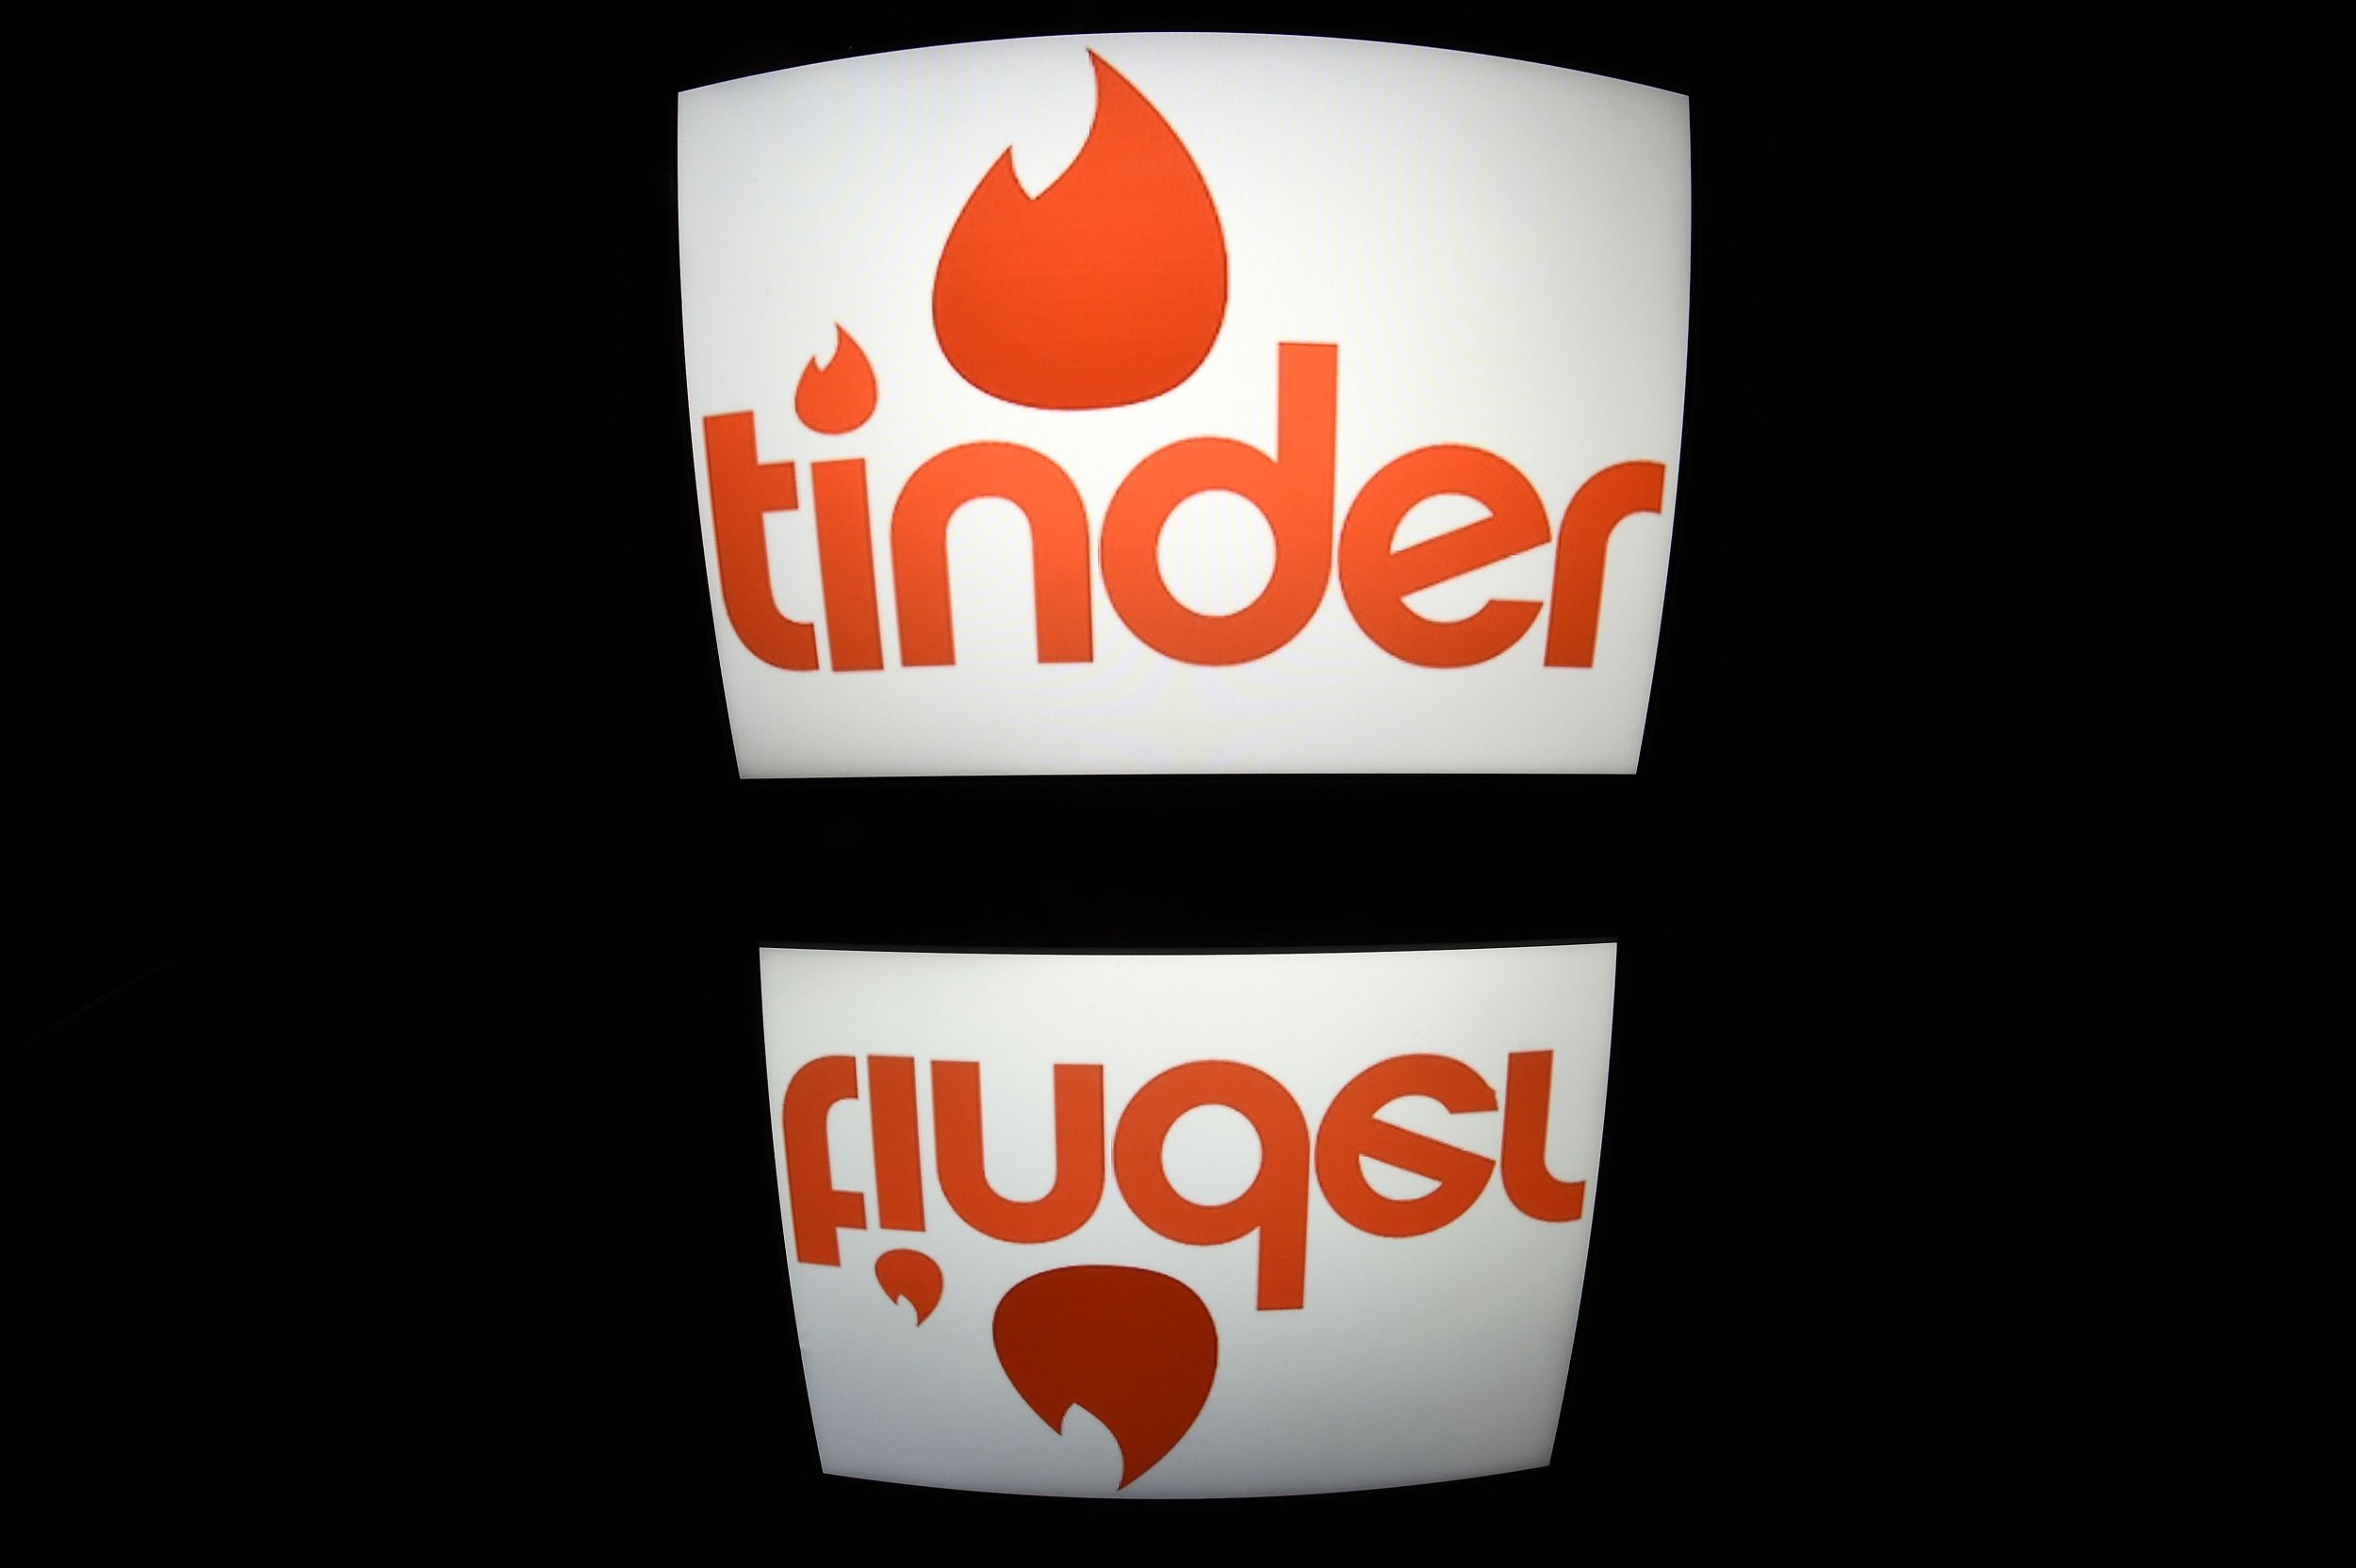 tinder logo down outage not working